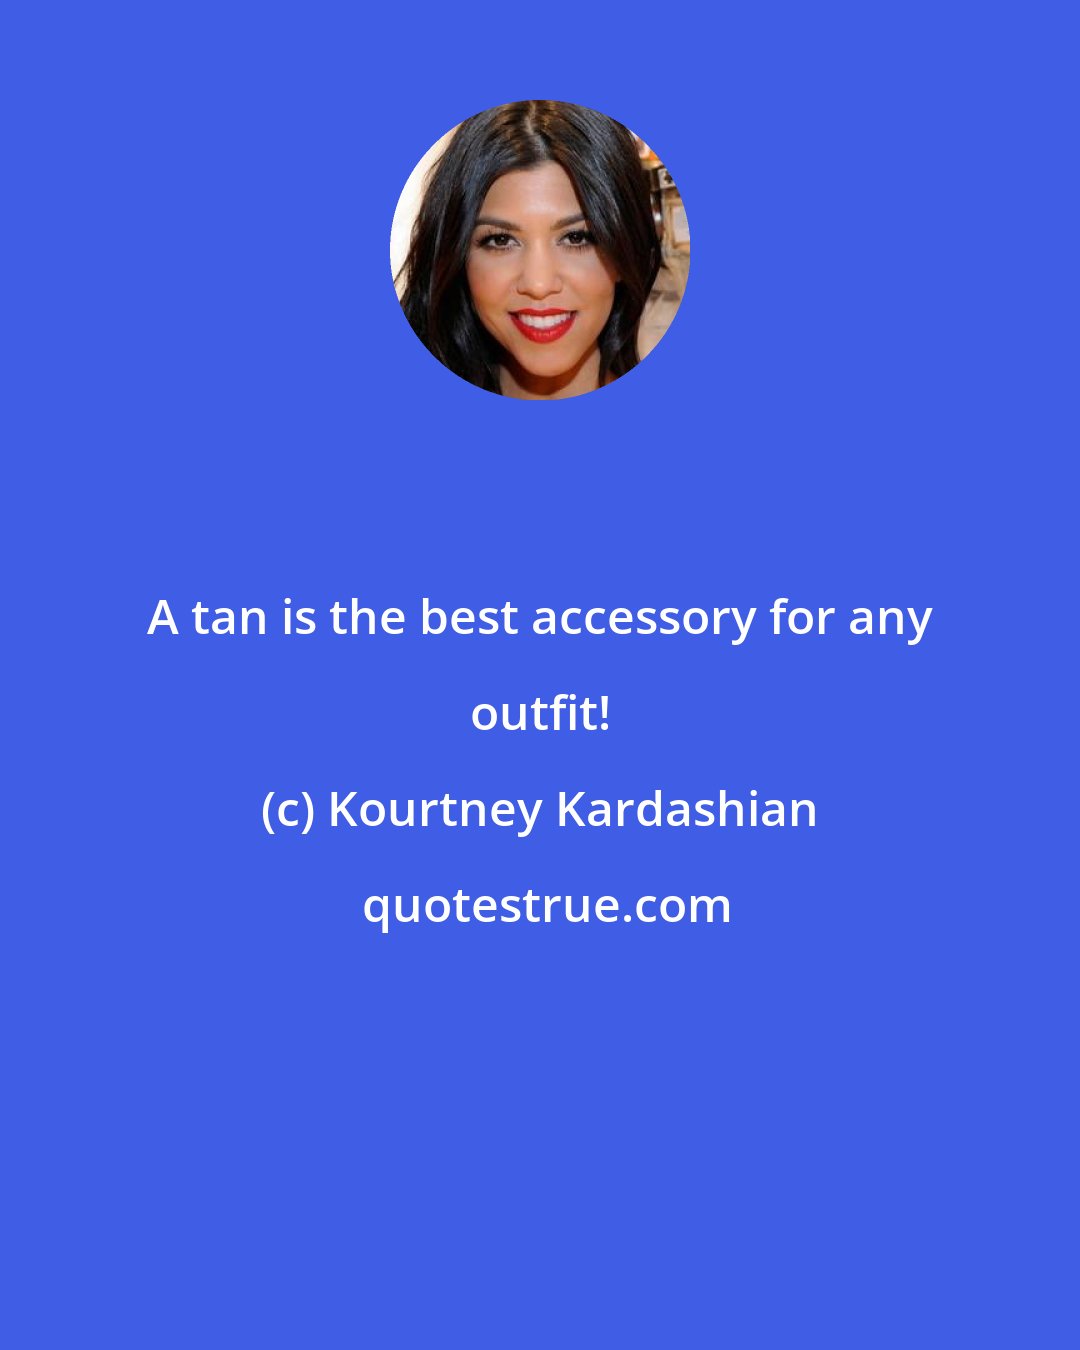 Kourtney Kardashian: A tan is the best accessory for any outfit!